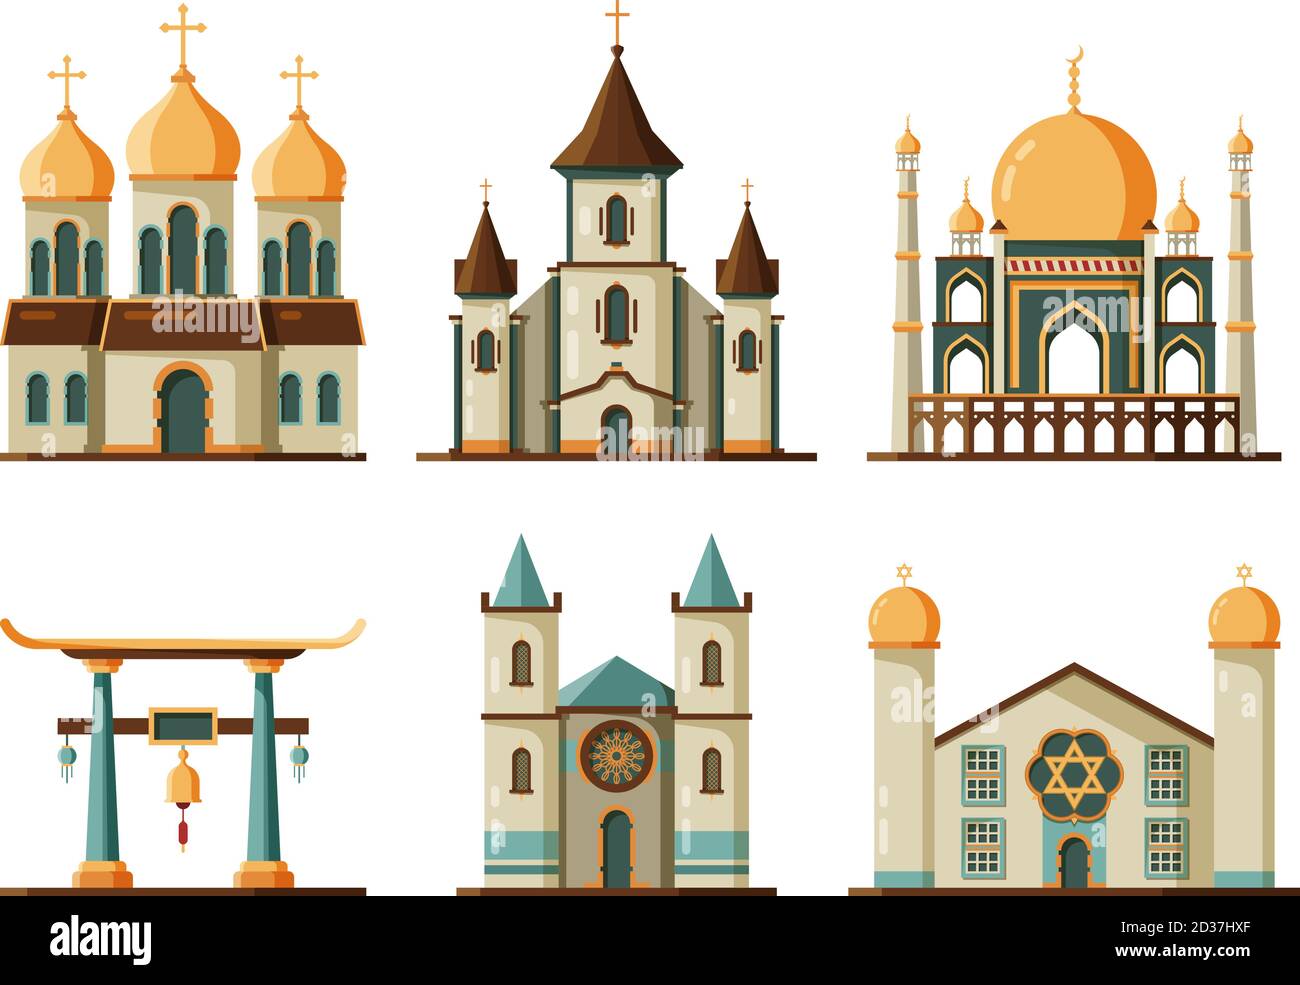 Religion buildings flat. Lutheran and christian church muslim mosque architectural traditional buildings Stock Vector